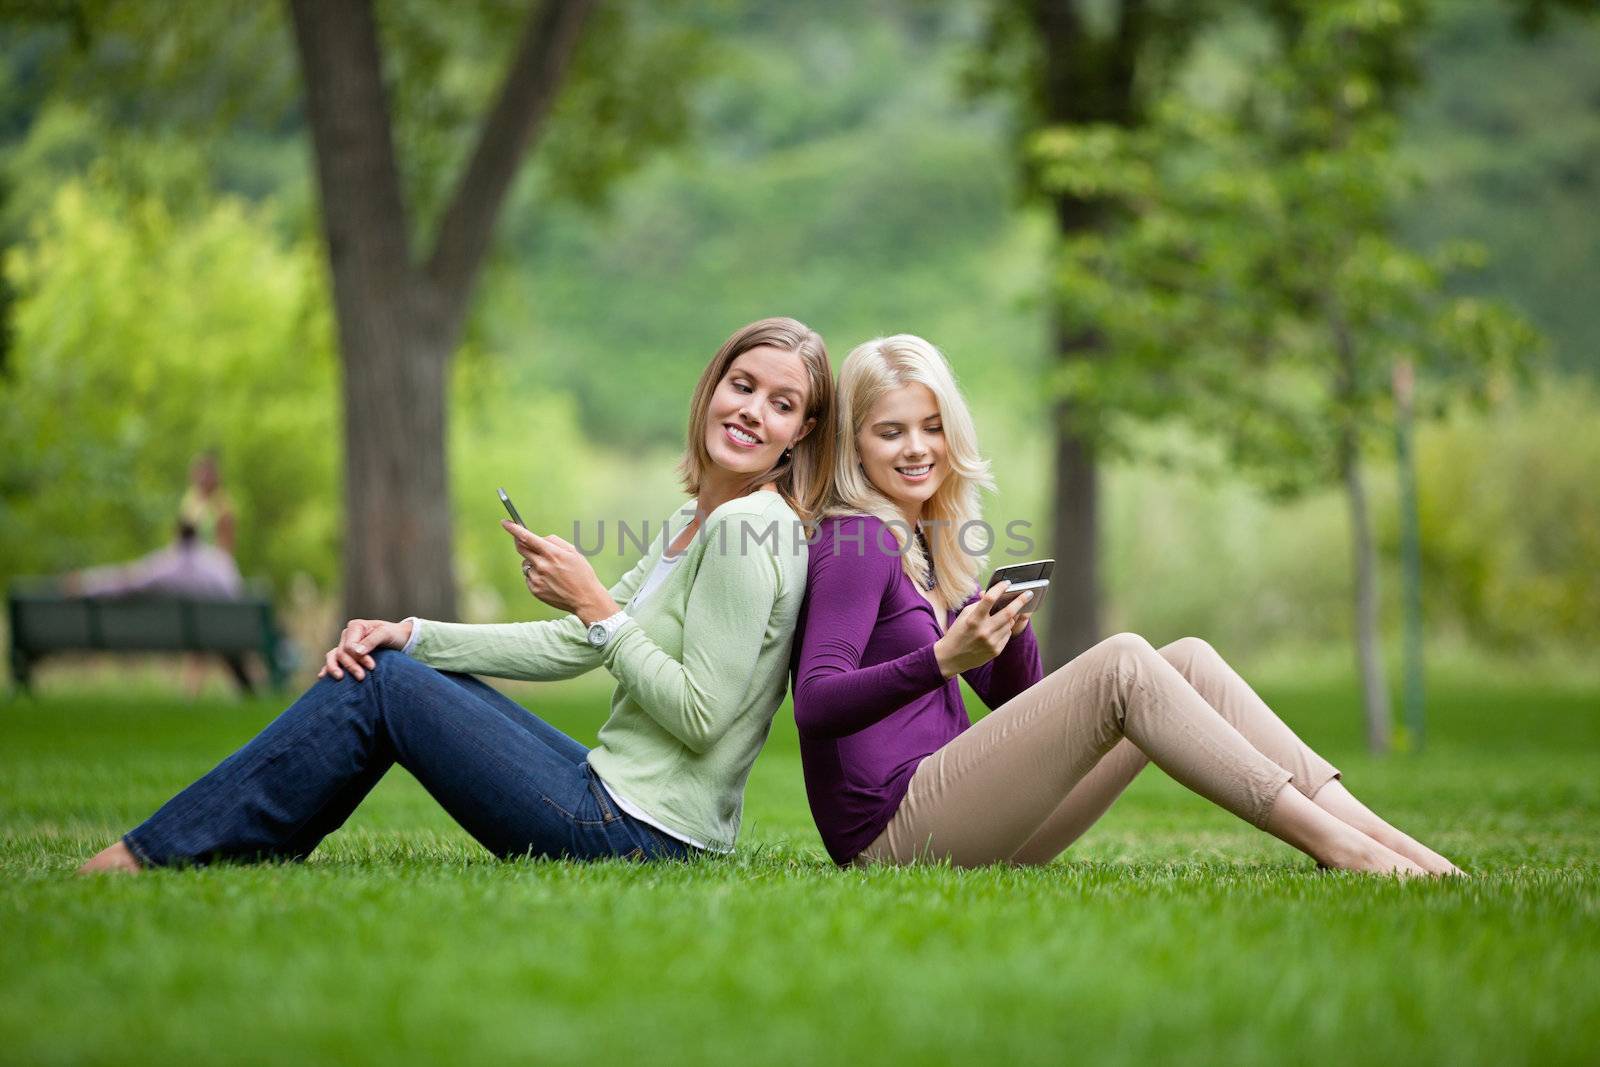 Women With Cellphones In Park by leaf